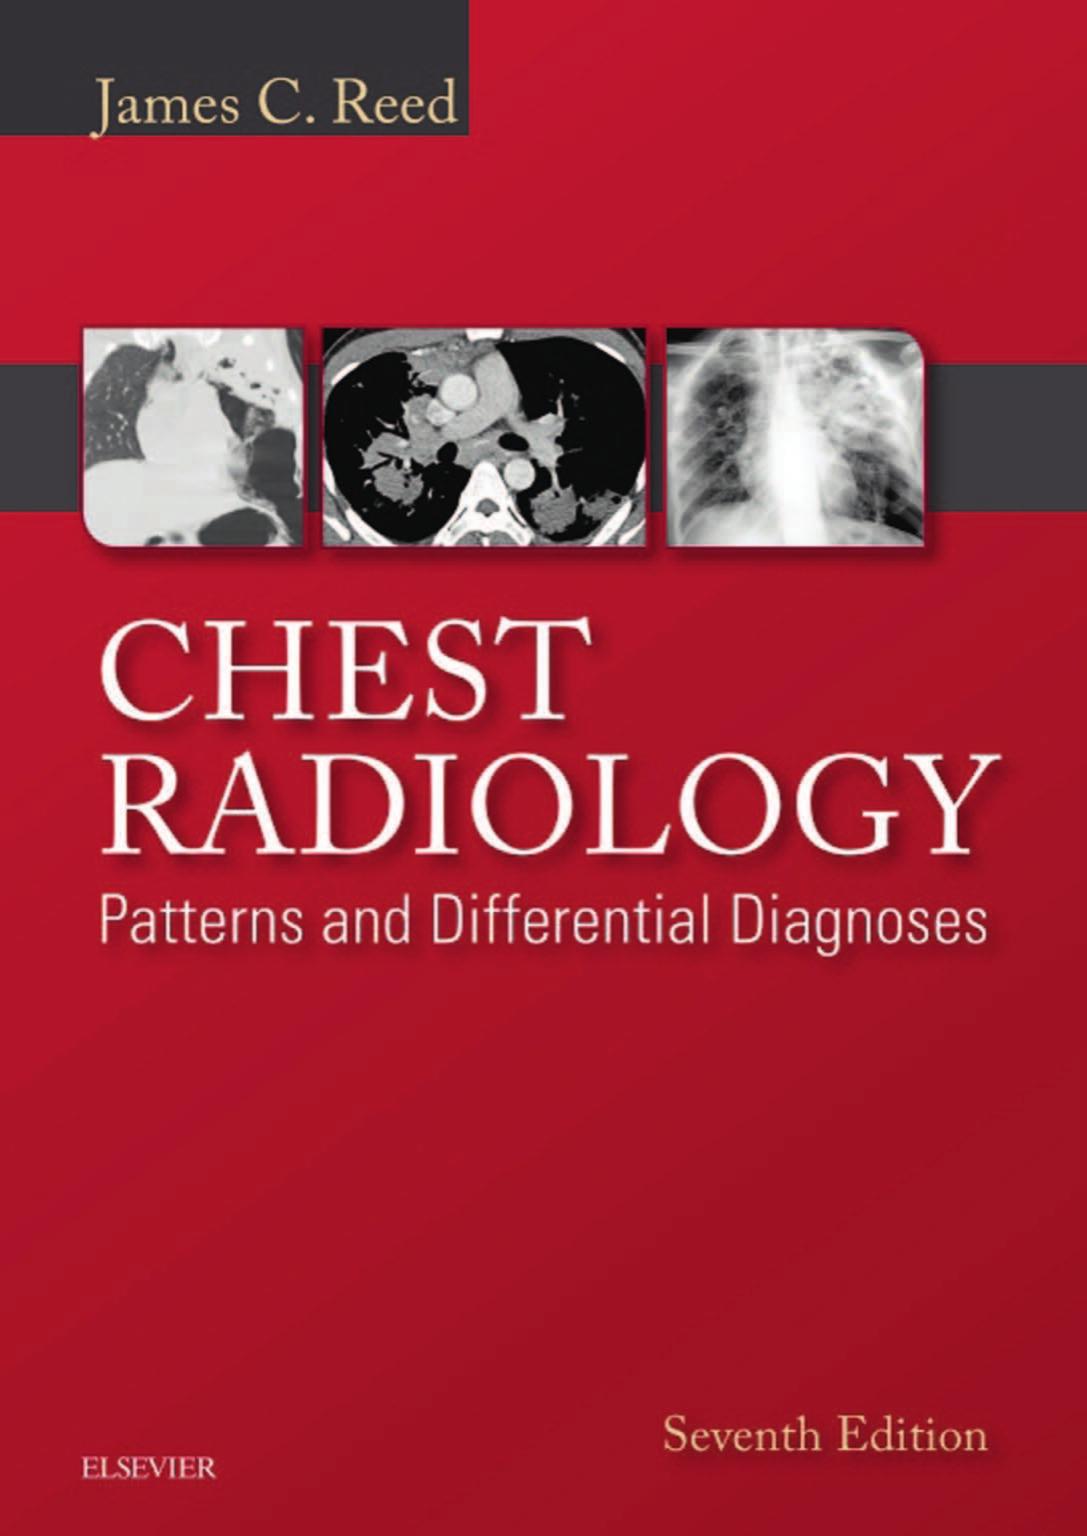 Chest Radiology: Patterns and Differential Diagnoses